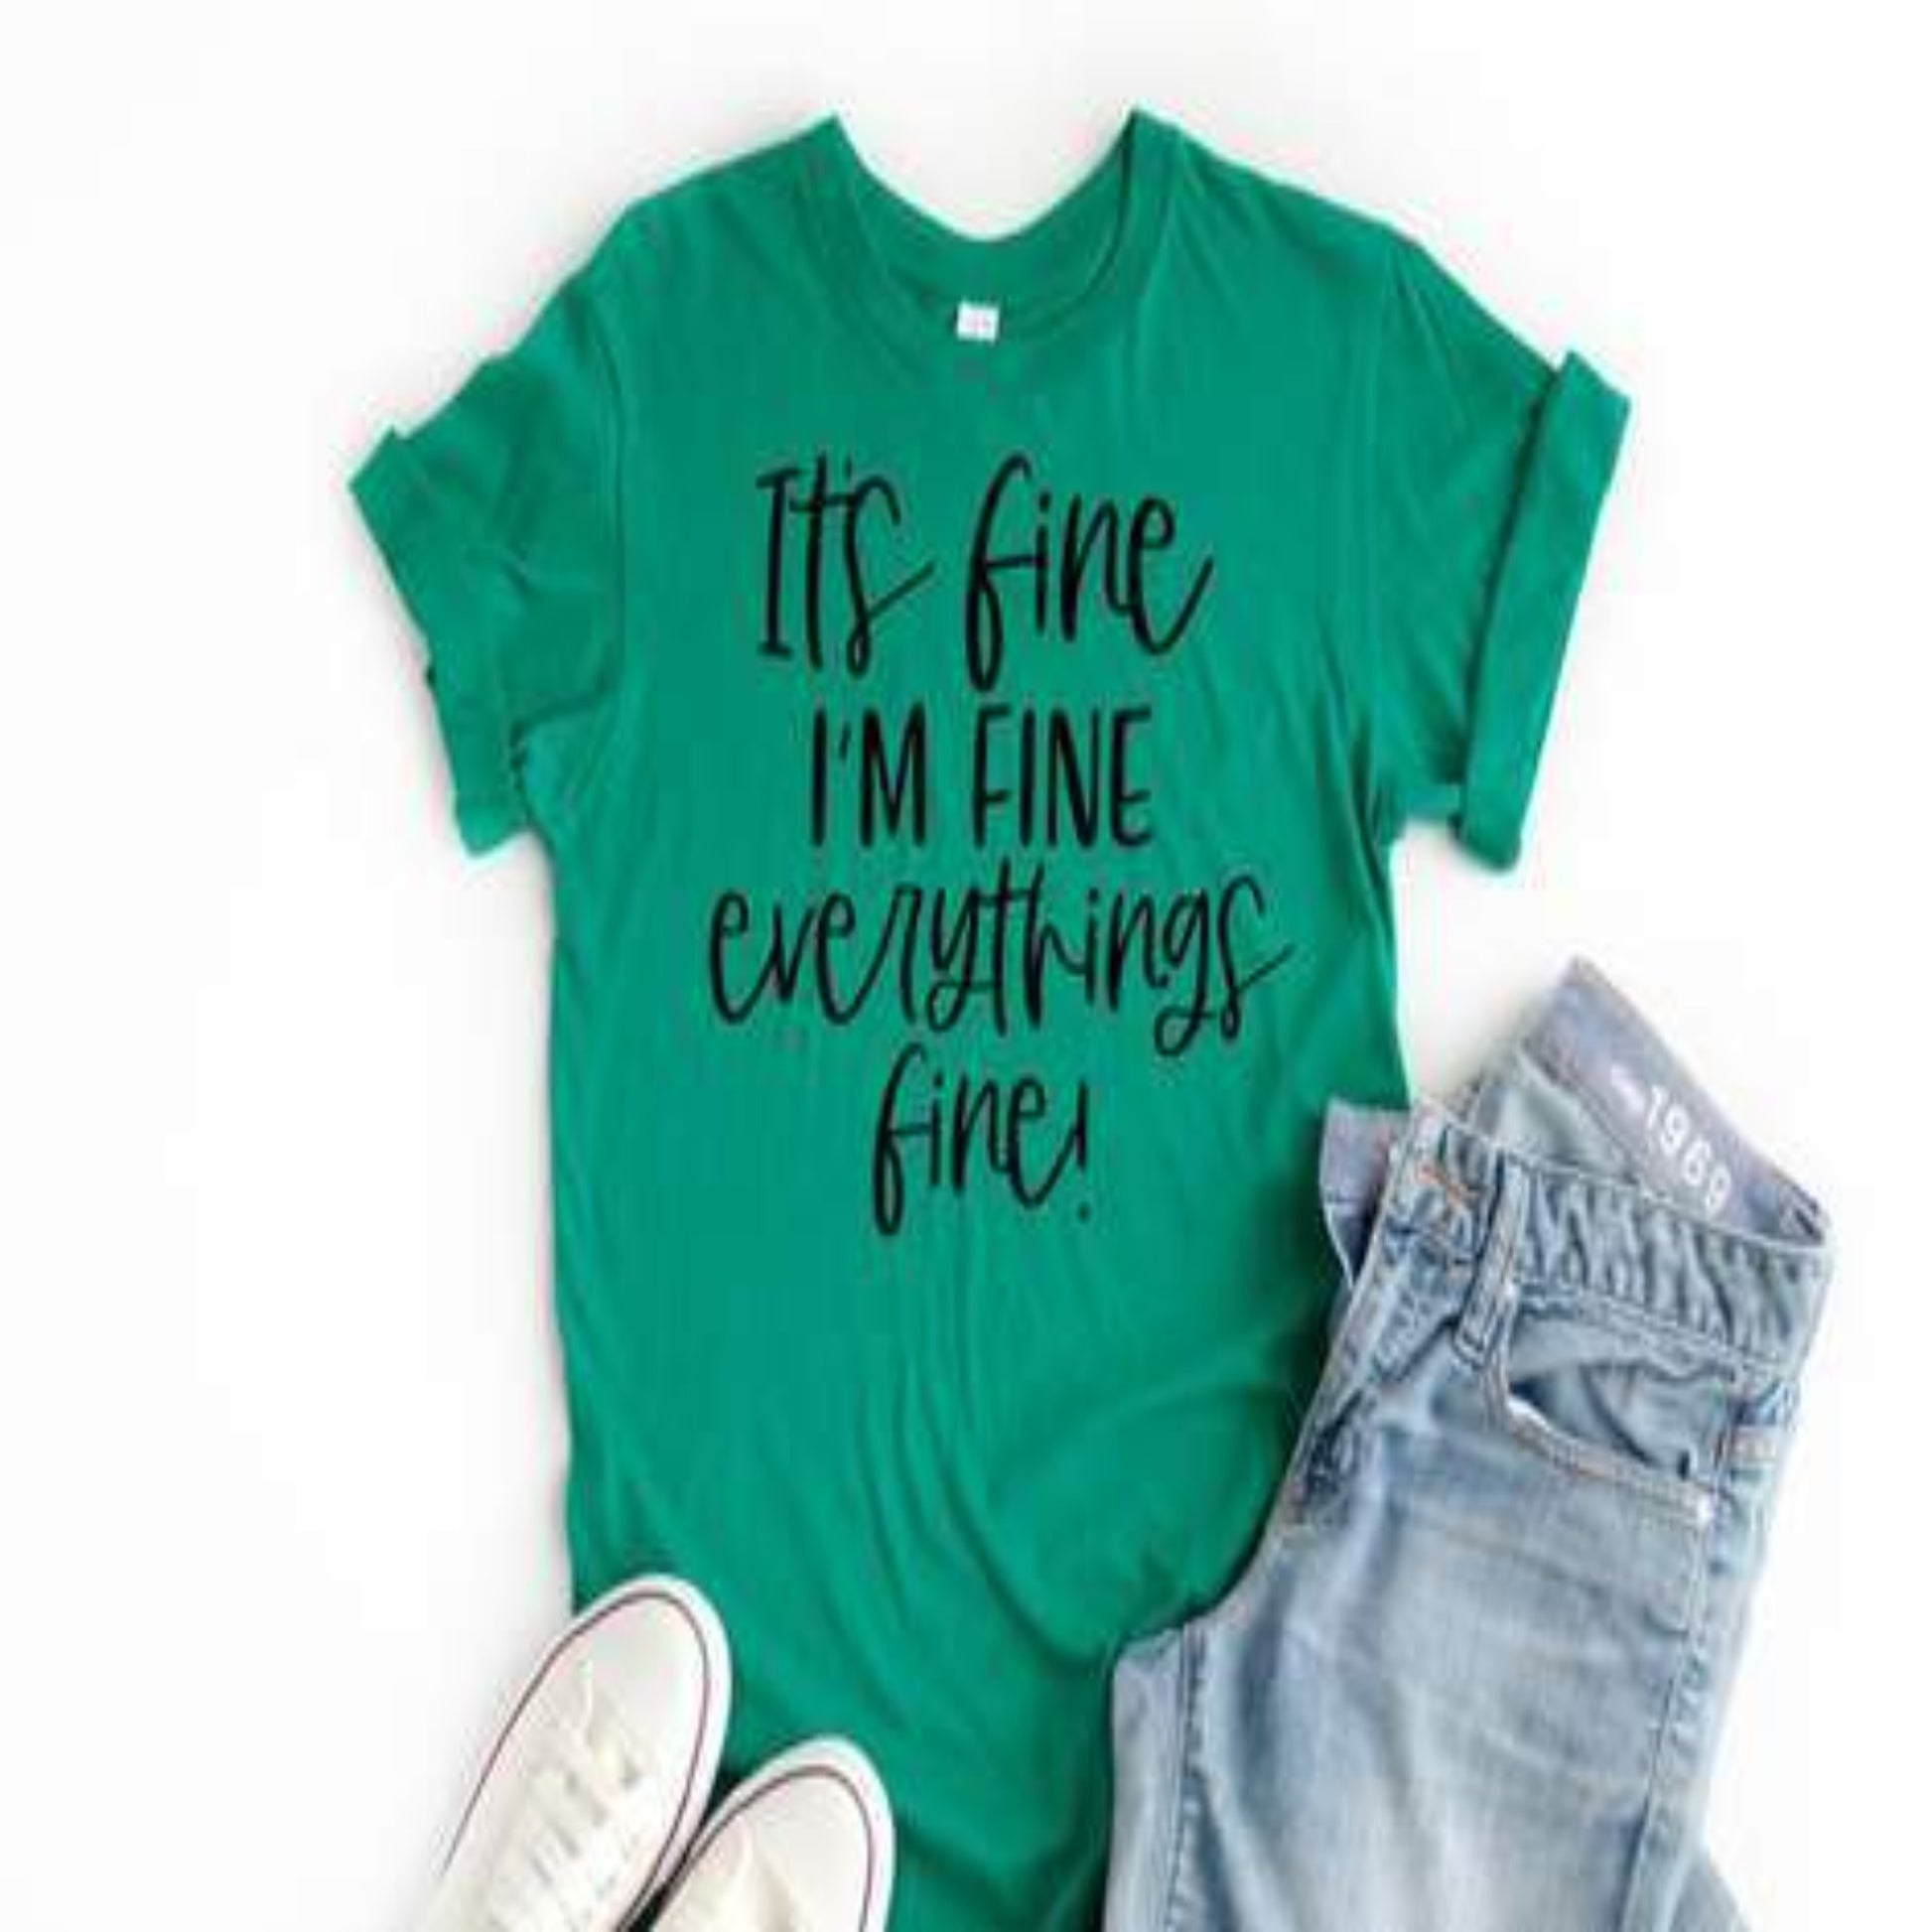 im_fine_everything specialty tee everyday wear comfortable tshirt casual shirt casual_and_chic_style cute_tshirts_ hustle_and_bustle busy_lifestyle tees funny_sarcastic tshirts